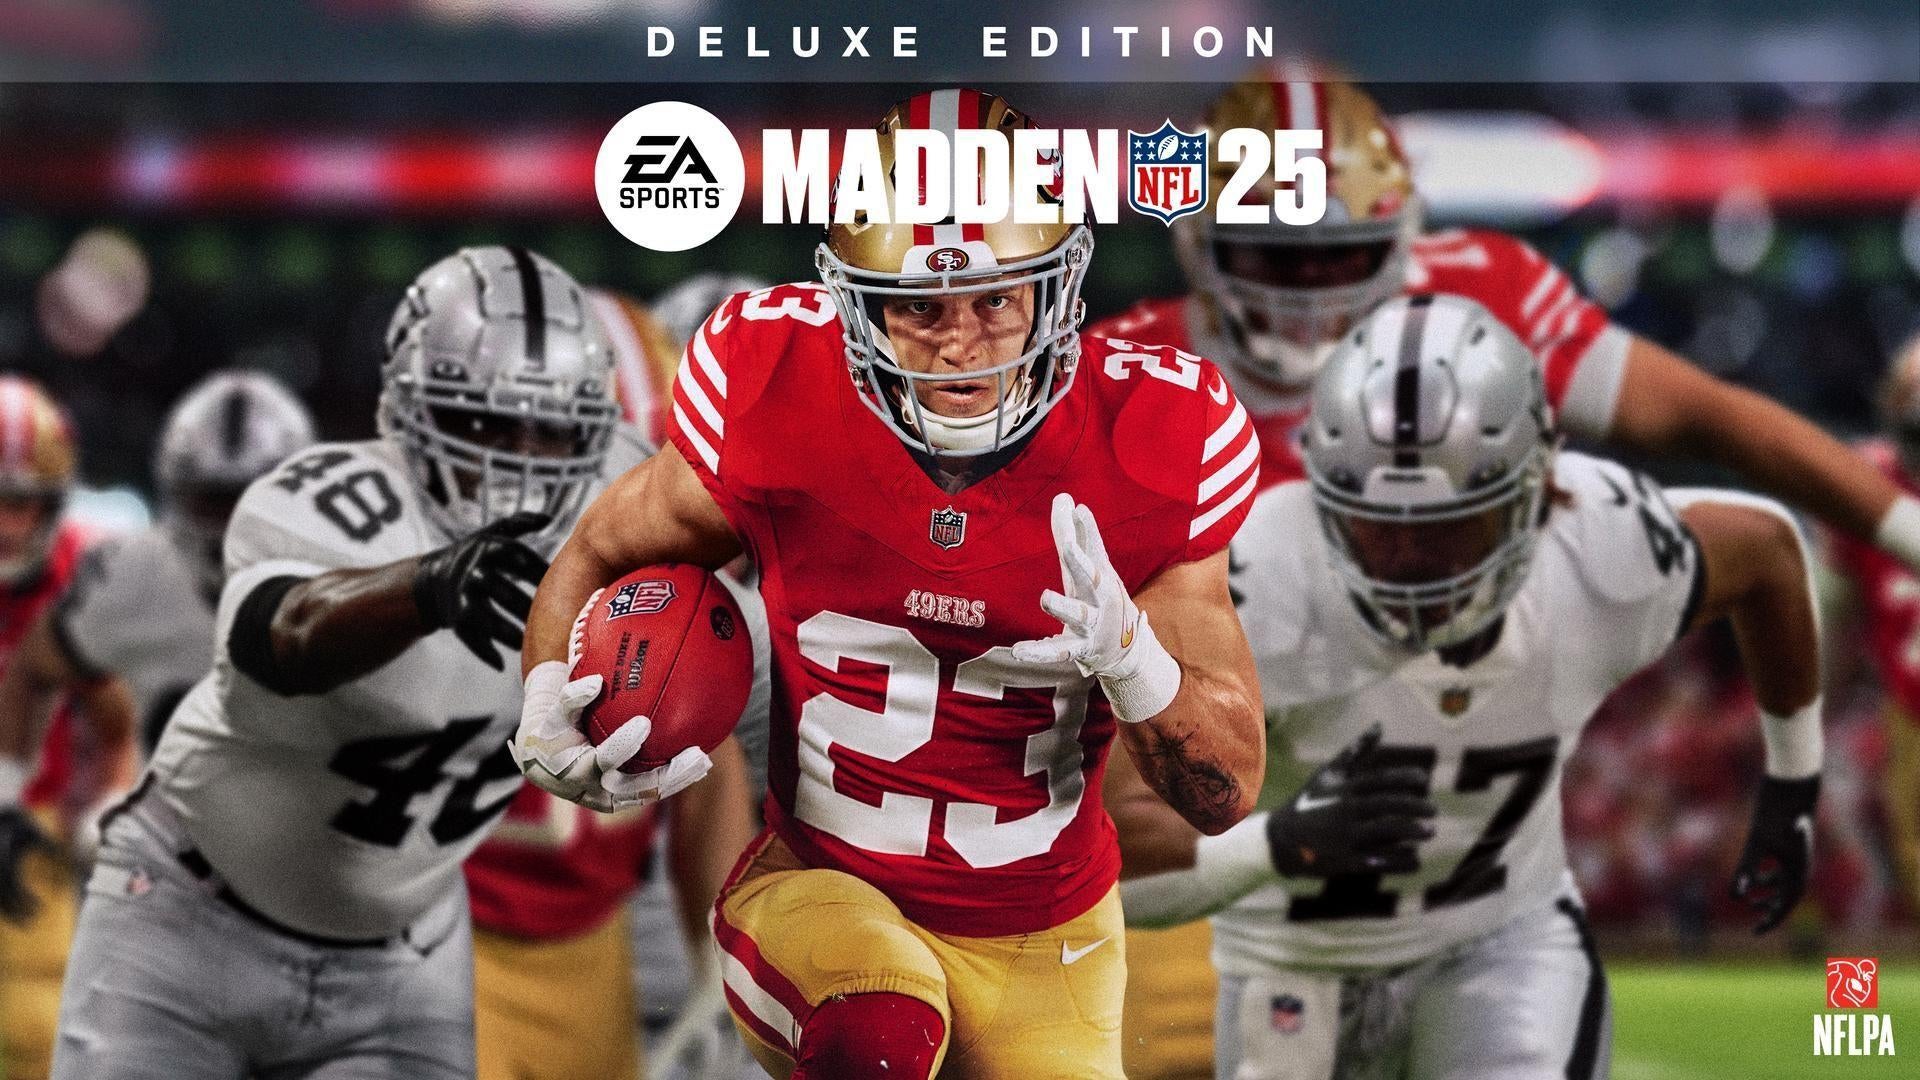 'Madden NFL 25' cover reveal: Christian McCaffrey becomes first 49ers star to be featured in 25 years